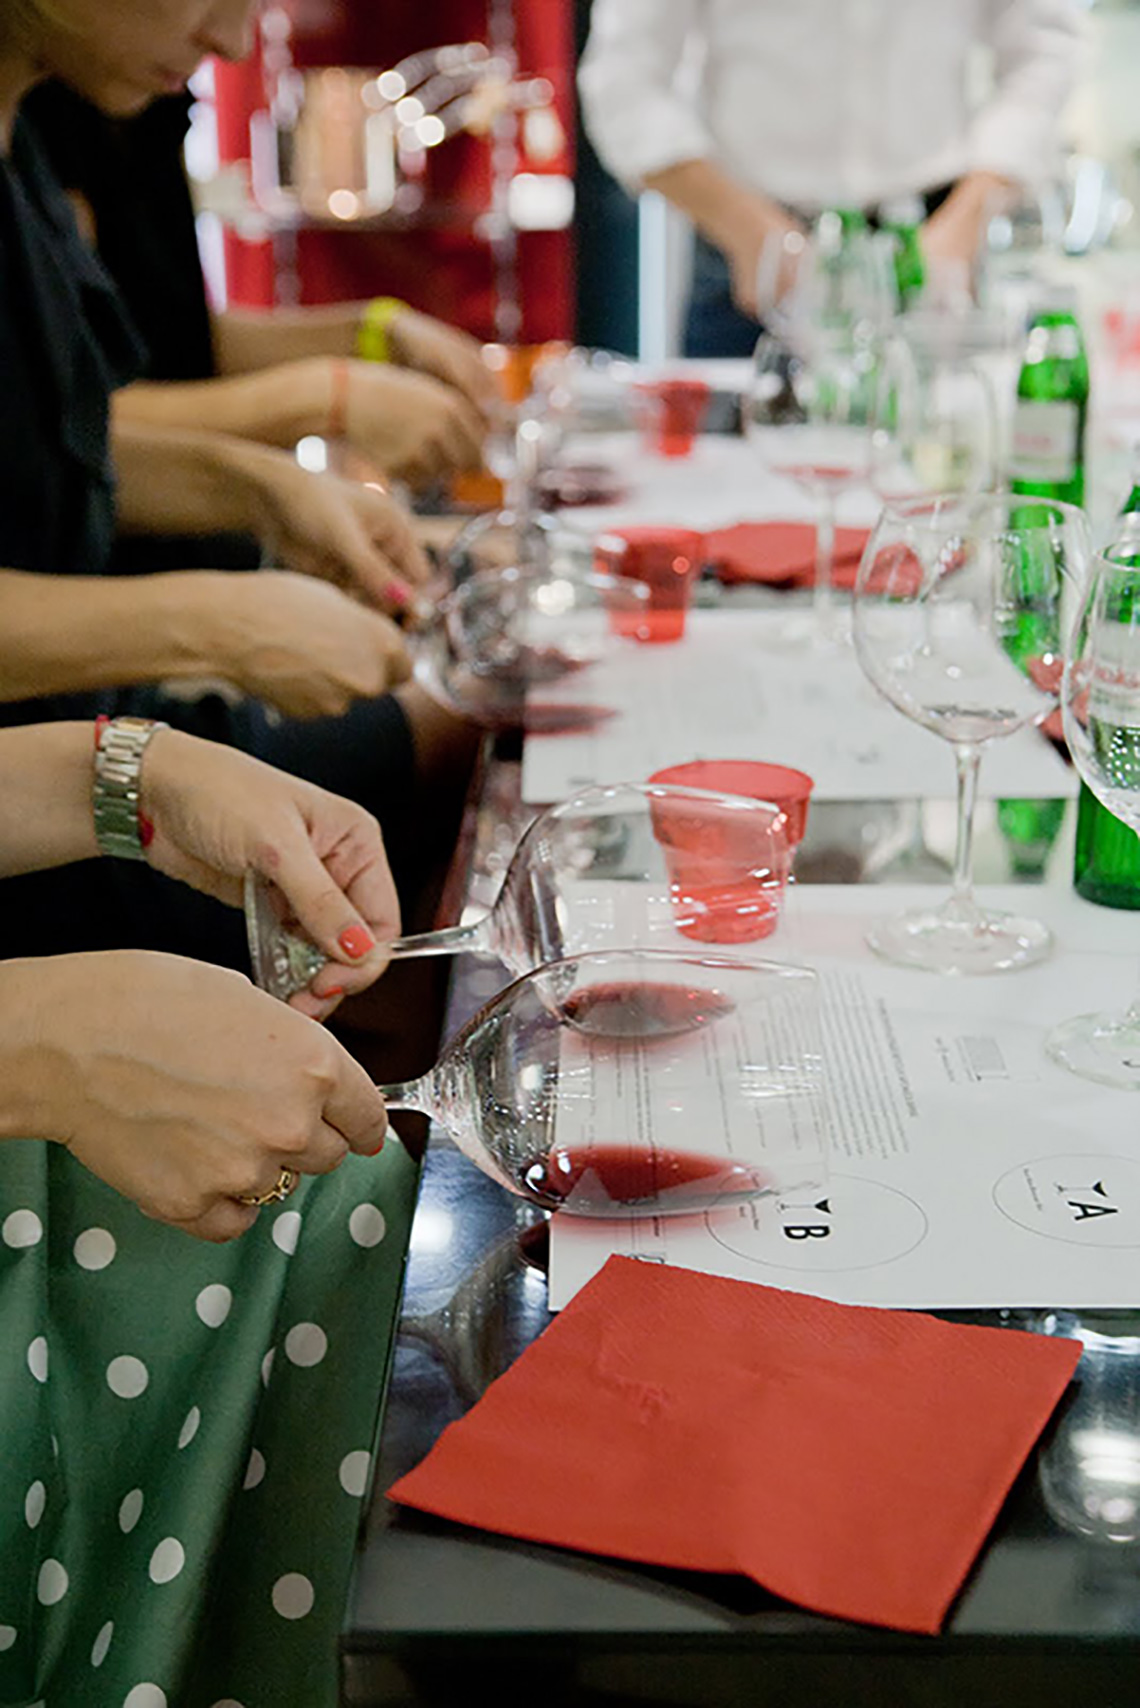 Red wine. Riedel Wine Glass Tasting at “12 Persons”. Cooking classes in Ukraine.